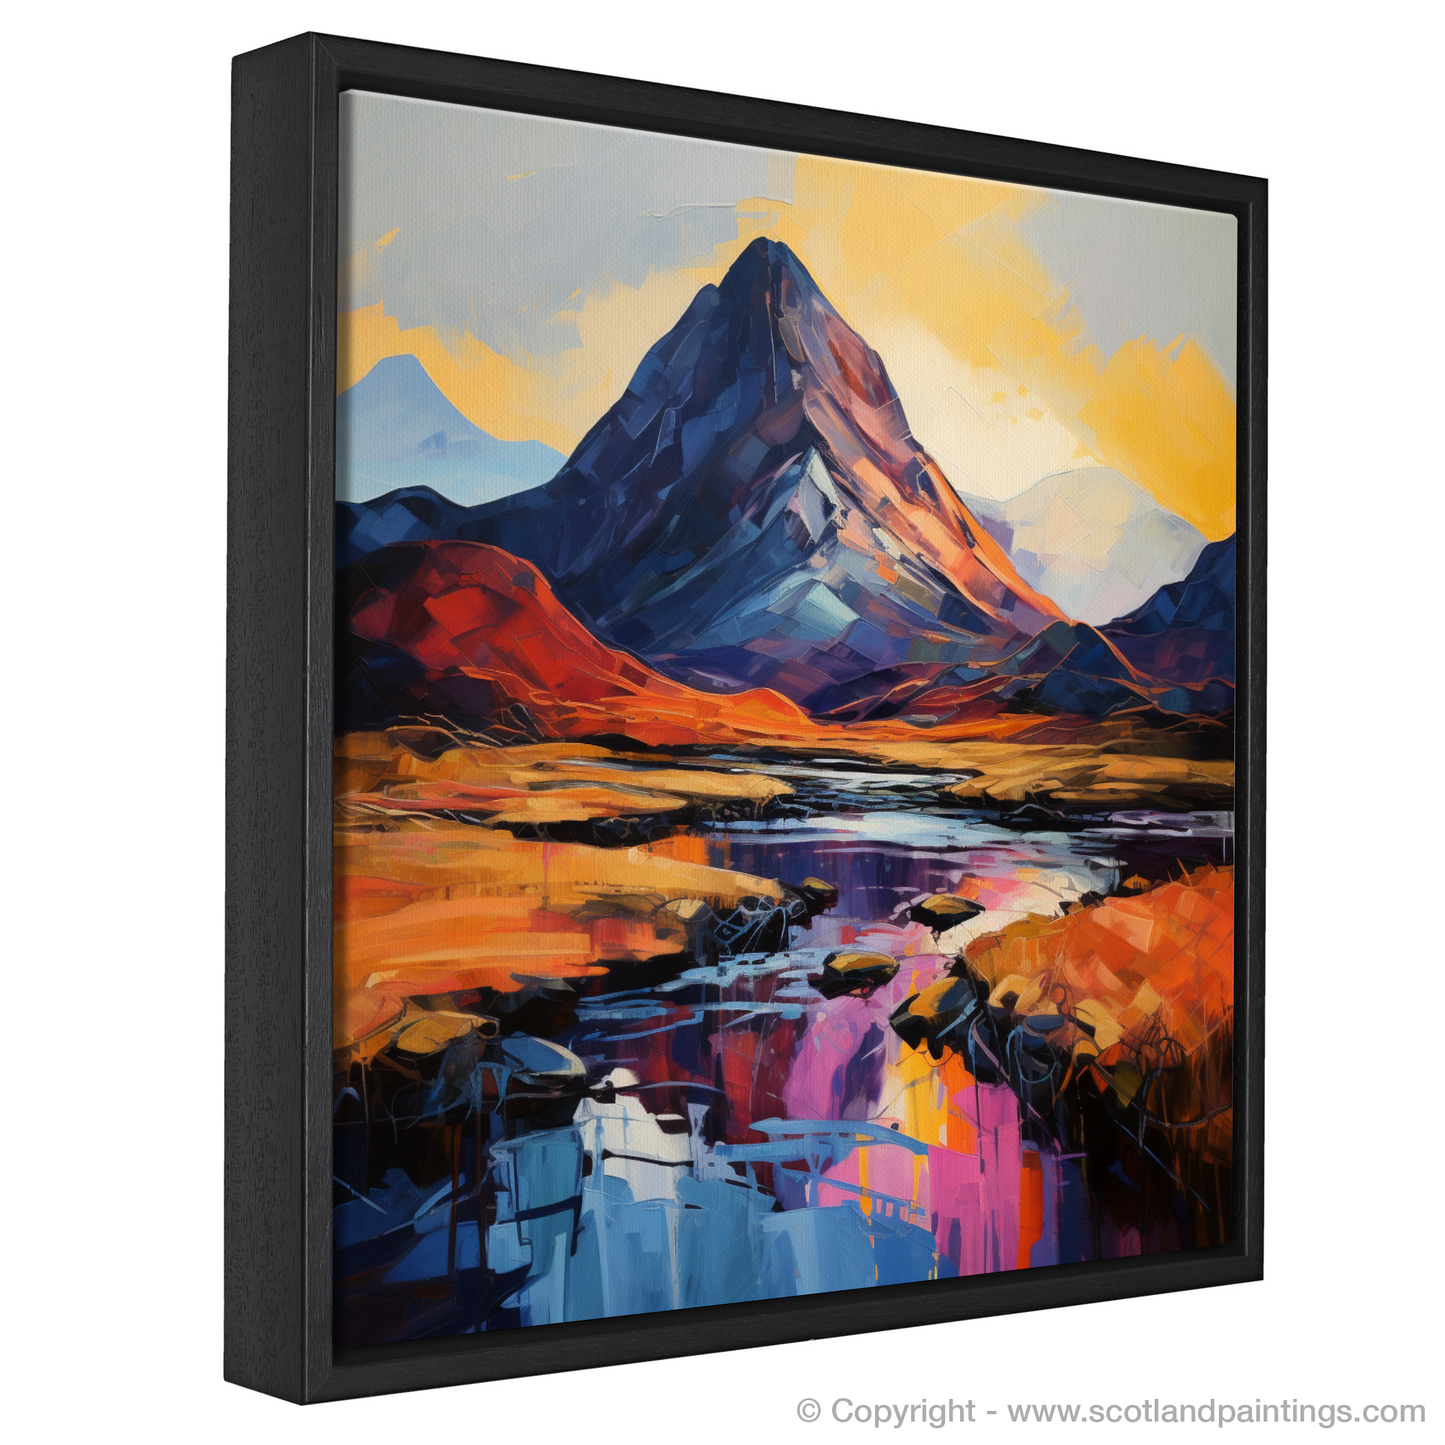 Painting and Art Print of Silhouetted peaks in Glencoe entitled "Emotive Peaks of Glencoe: An Expressionist Journey".